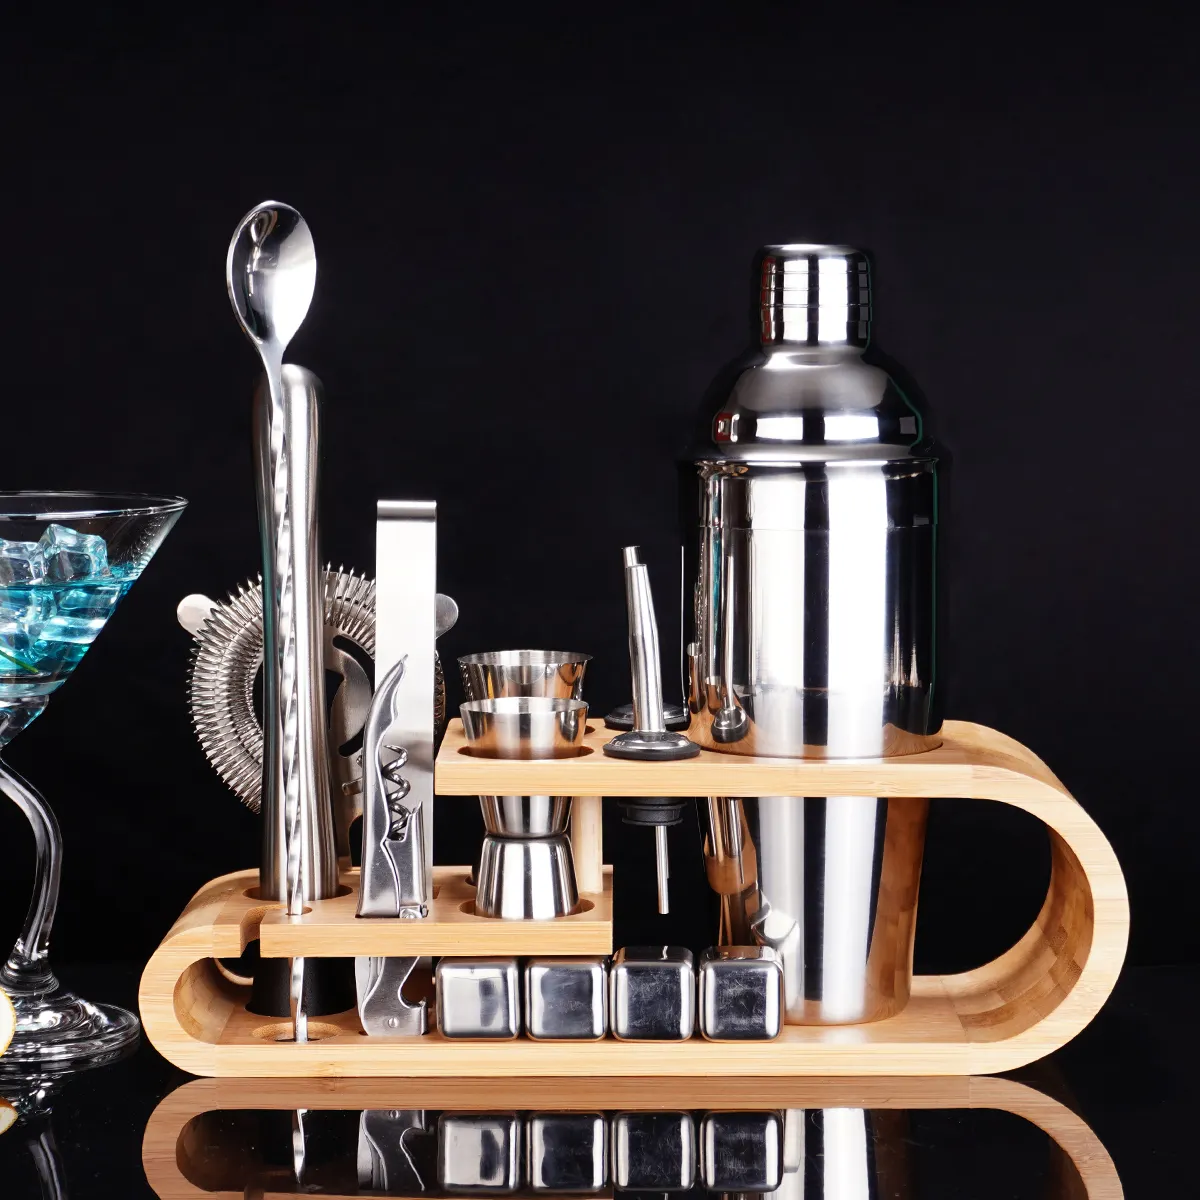 Bar Tools Accessories Dinner Party Mixology Wine Stainless Steel Bartender Kit Cocktail Shakers Set With Wooden Stand Holder